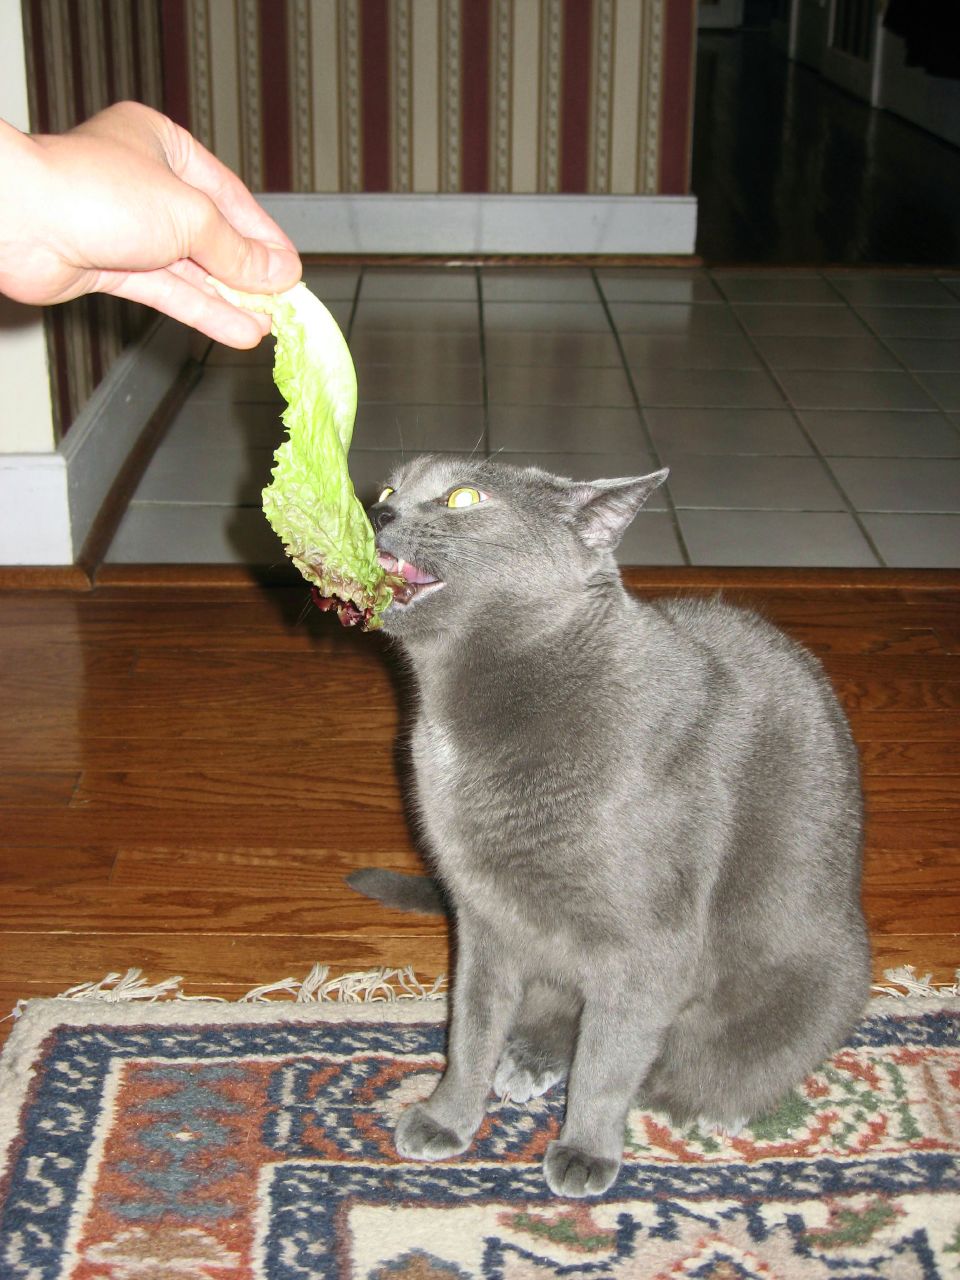 a cat eating some green salad in it's mouth